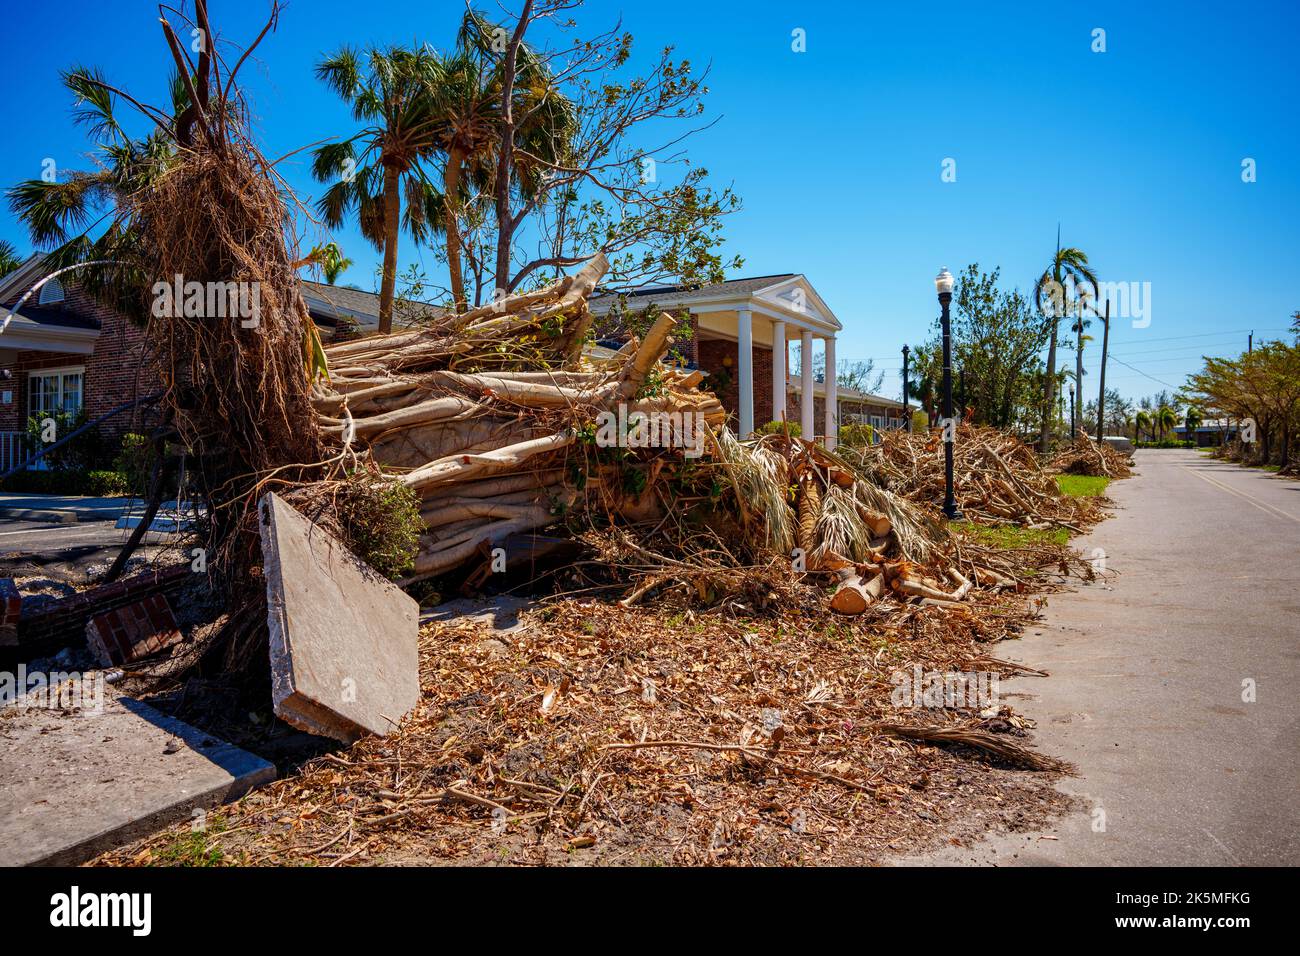 Image of a tree ripped from the sidewalk in Punta Gorda aftermath Hurricane Ian Stock Photo